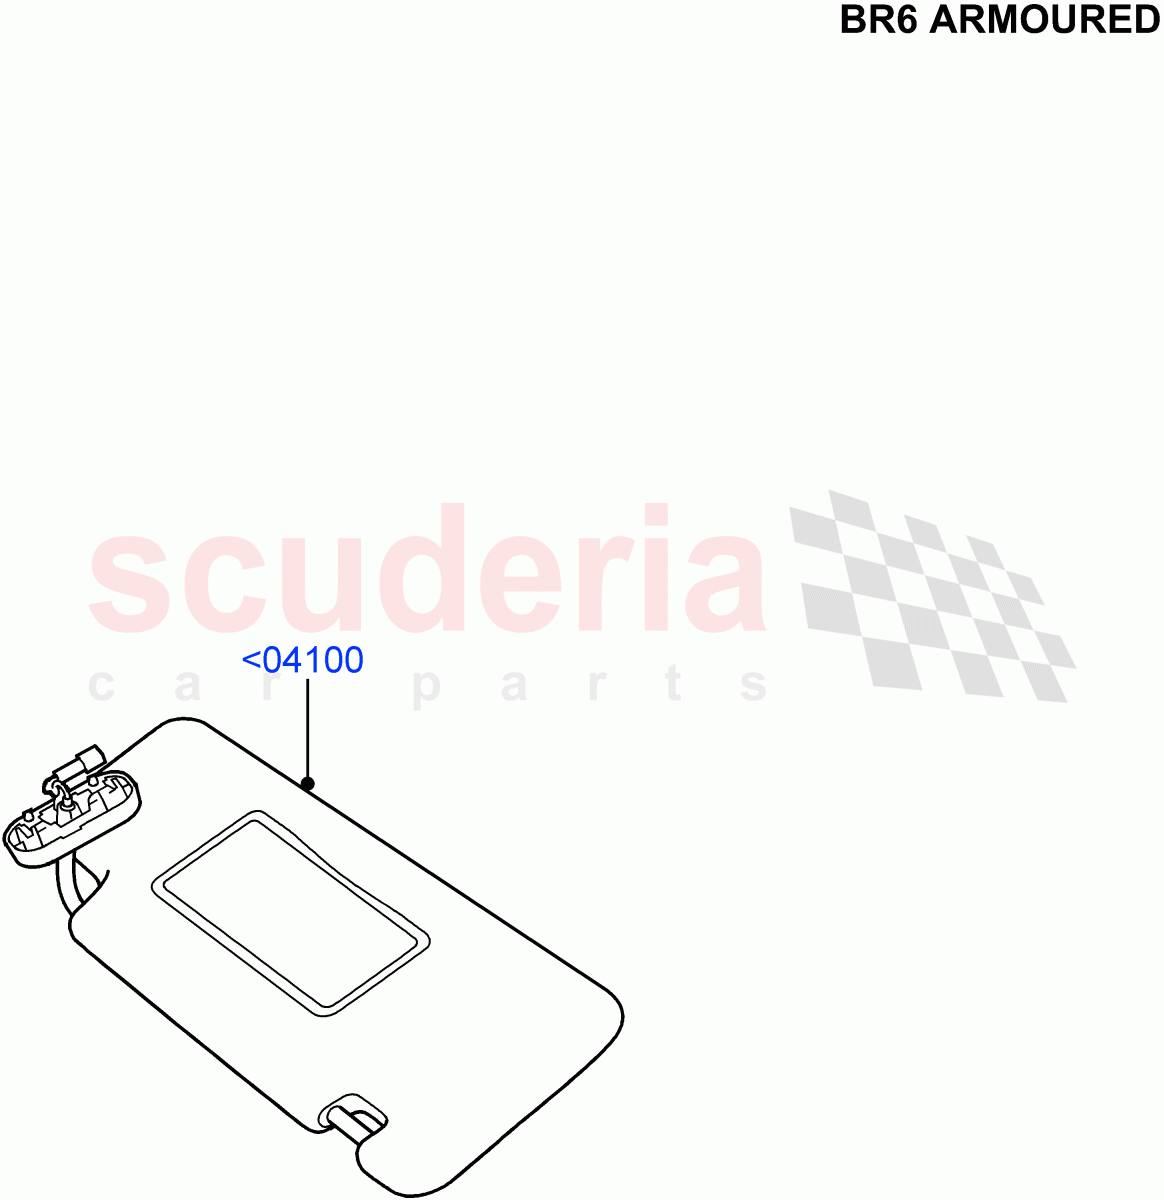 Headlining And Sun Visors(With B6 Level Armouring)((V)FROMAA000001) of Land Rover Land Rover Discovery 4 (2010-2016) [5.0 OHC SGDI NA V8 Petrol]